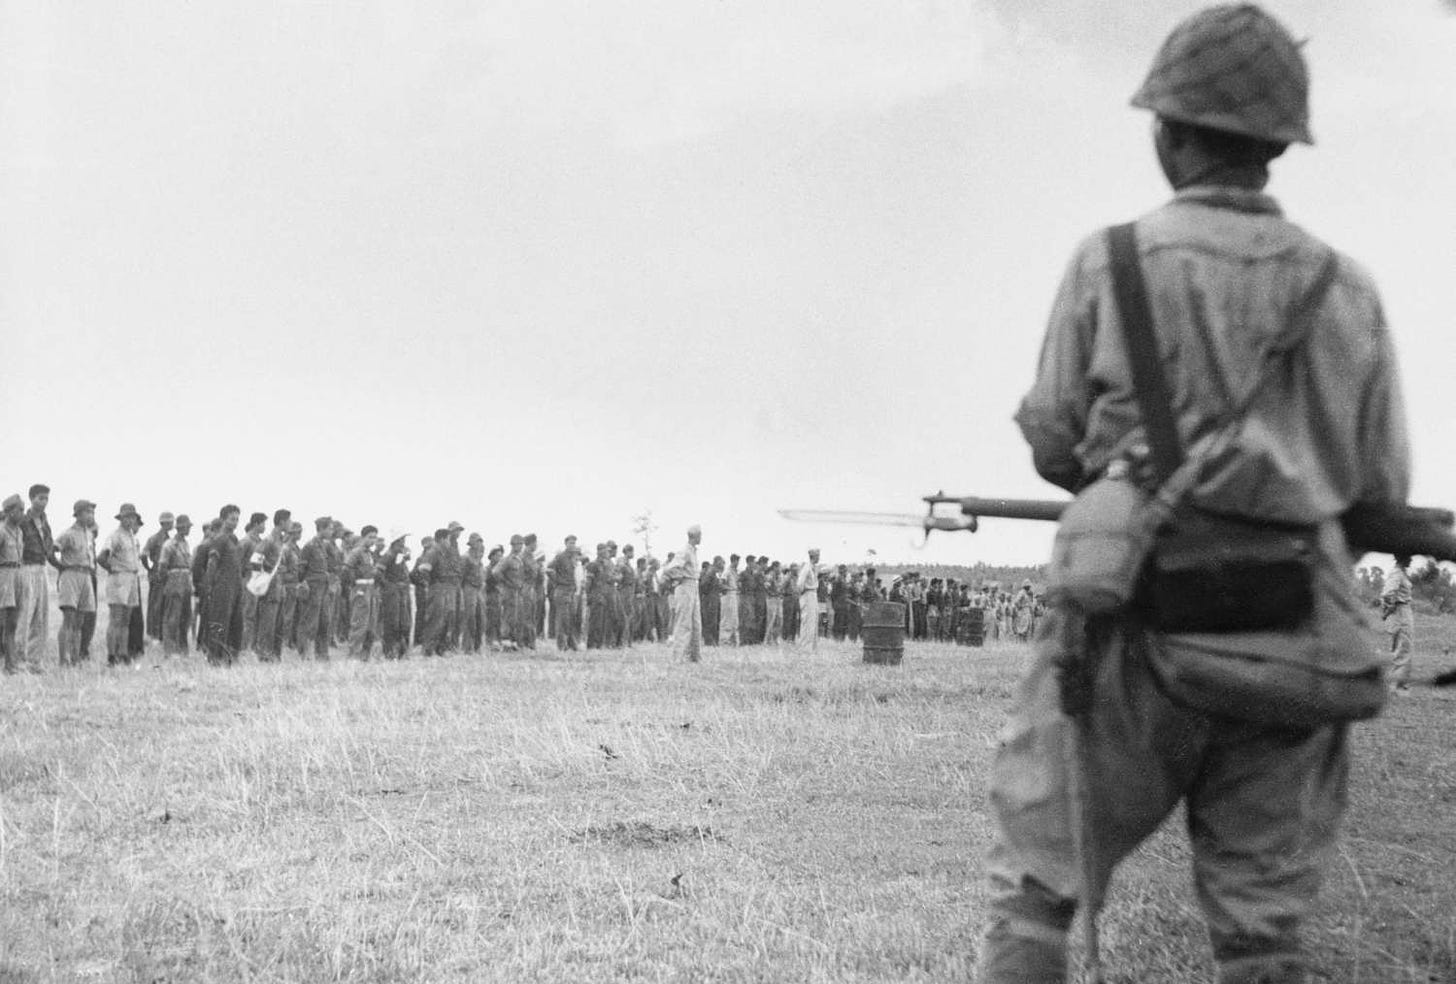 The Bataan Death March: WWII